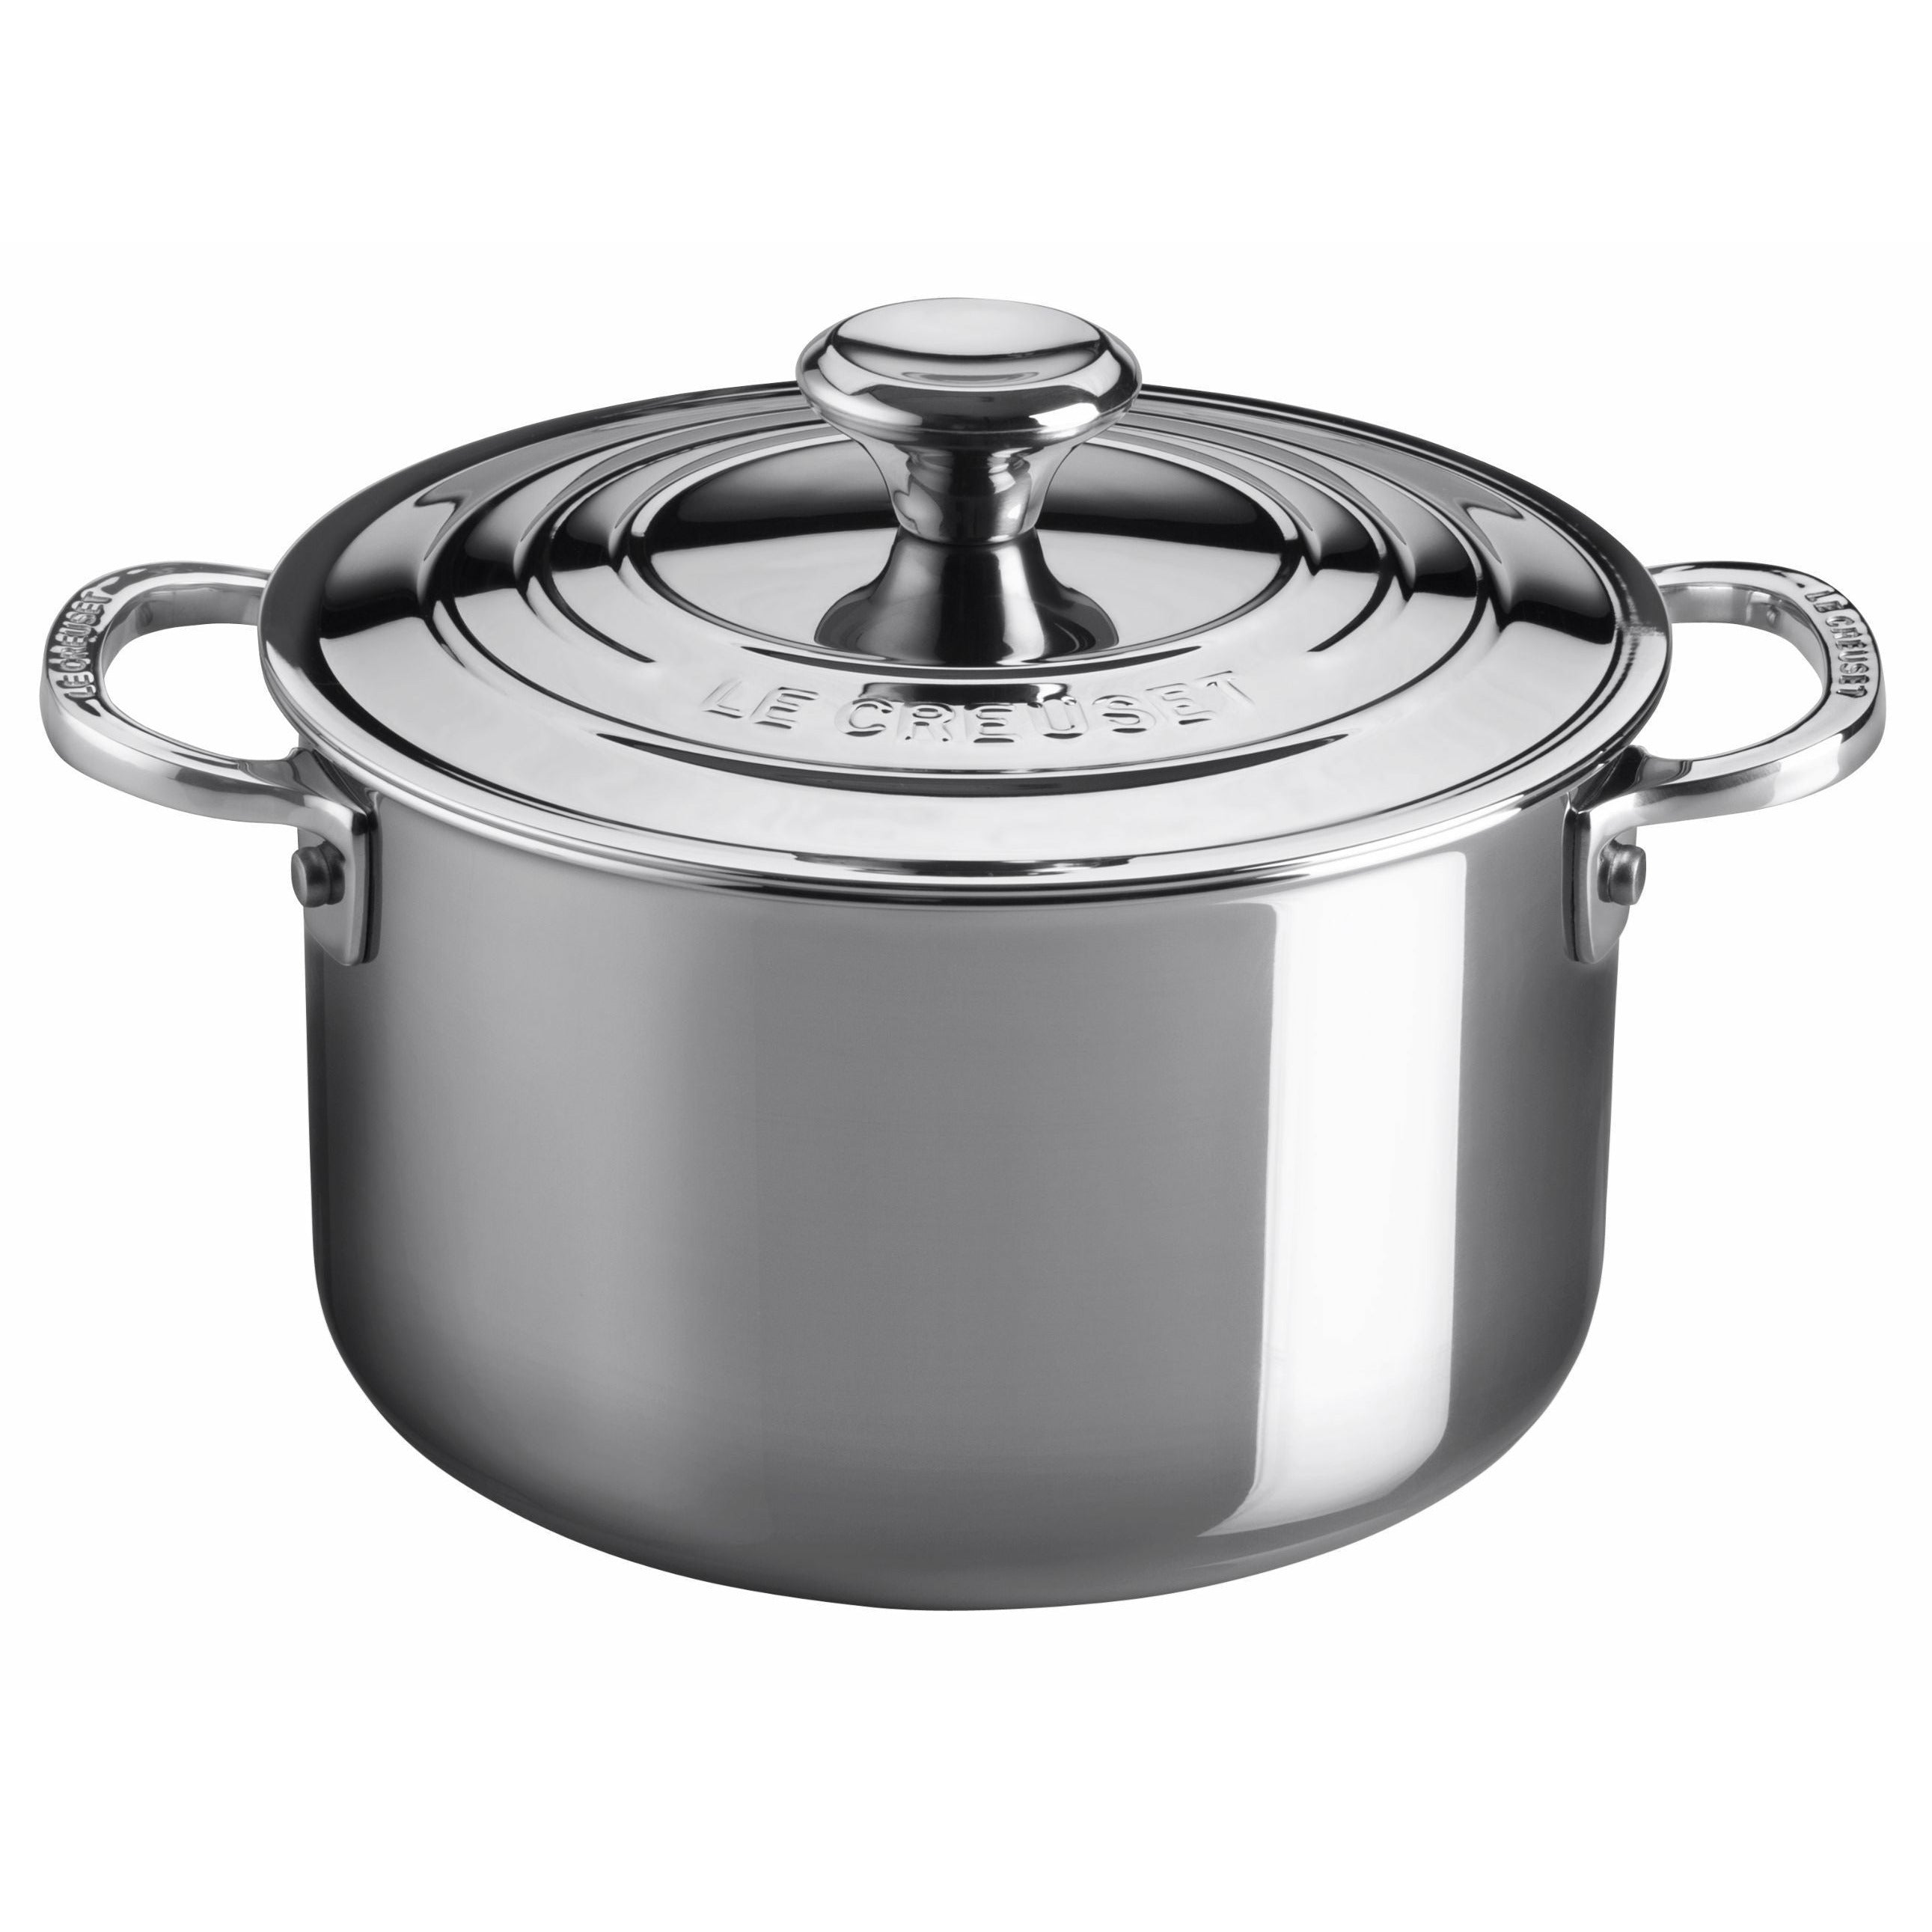 Le Creuset Signature Stainless Steel Deep Casserole With Lid, 2.8 L